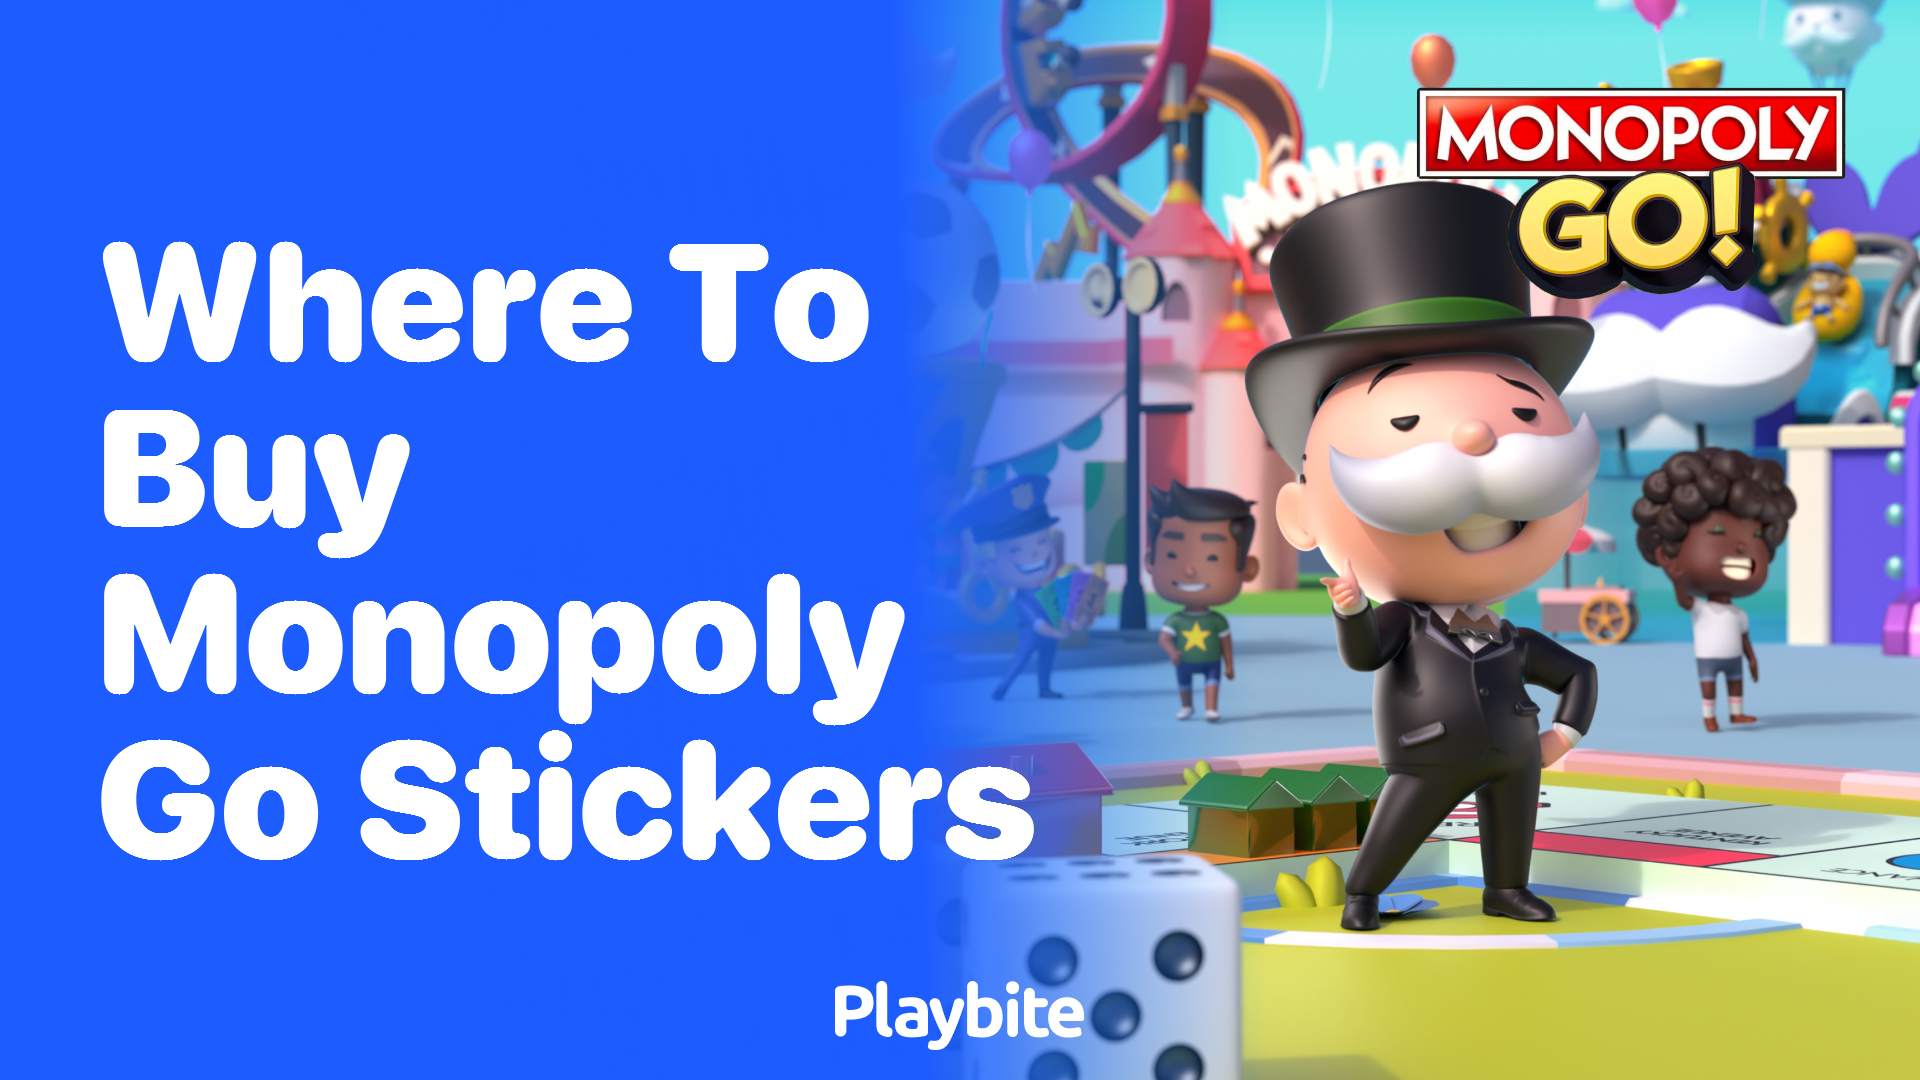 Where to Buy Monopoly Go Stickers